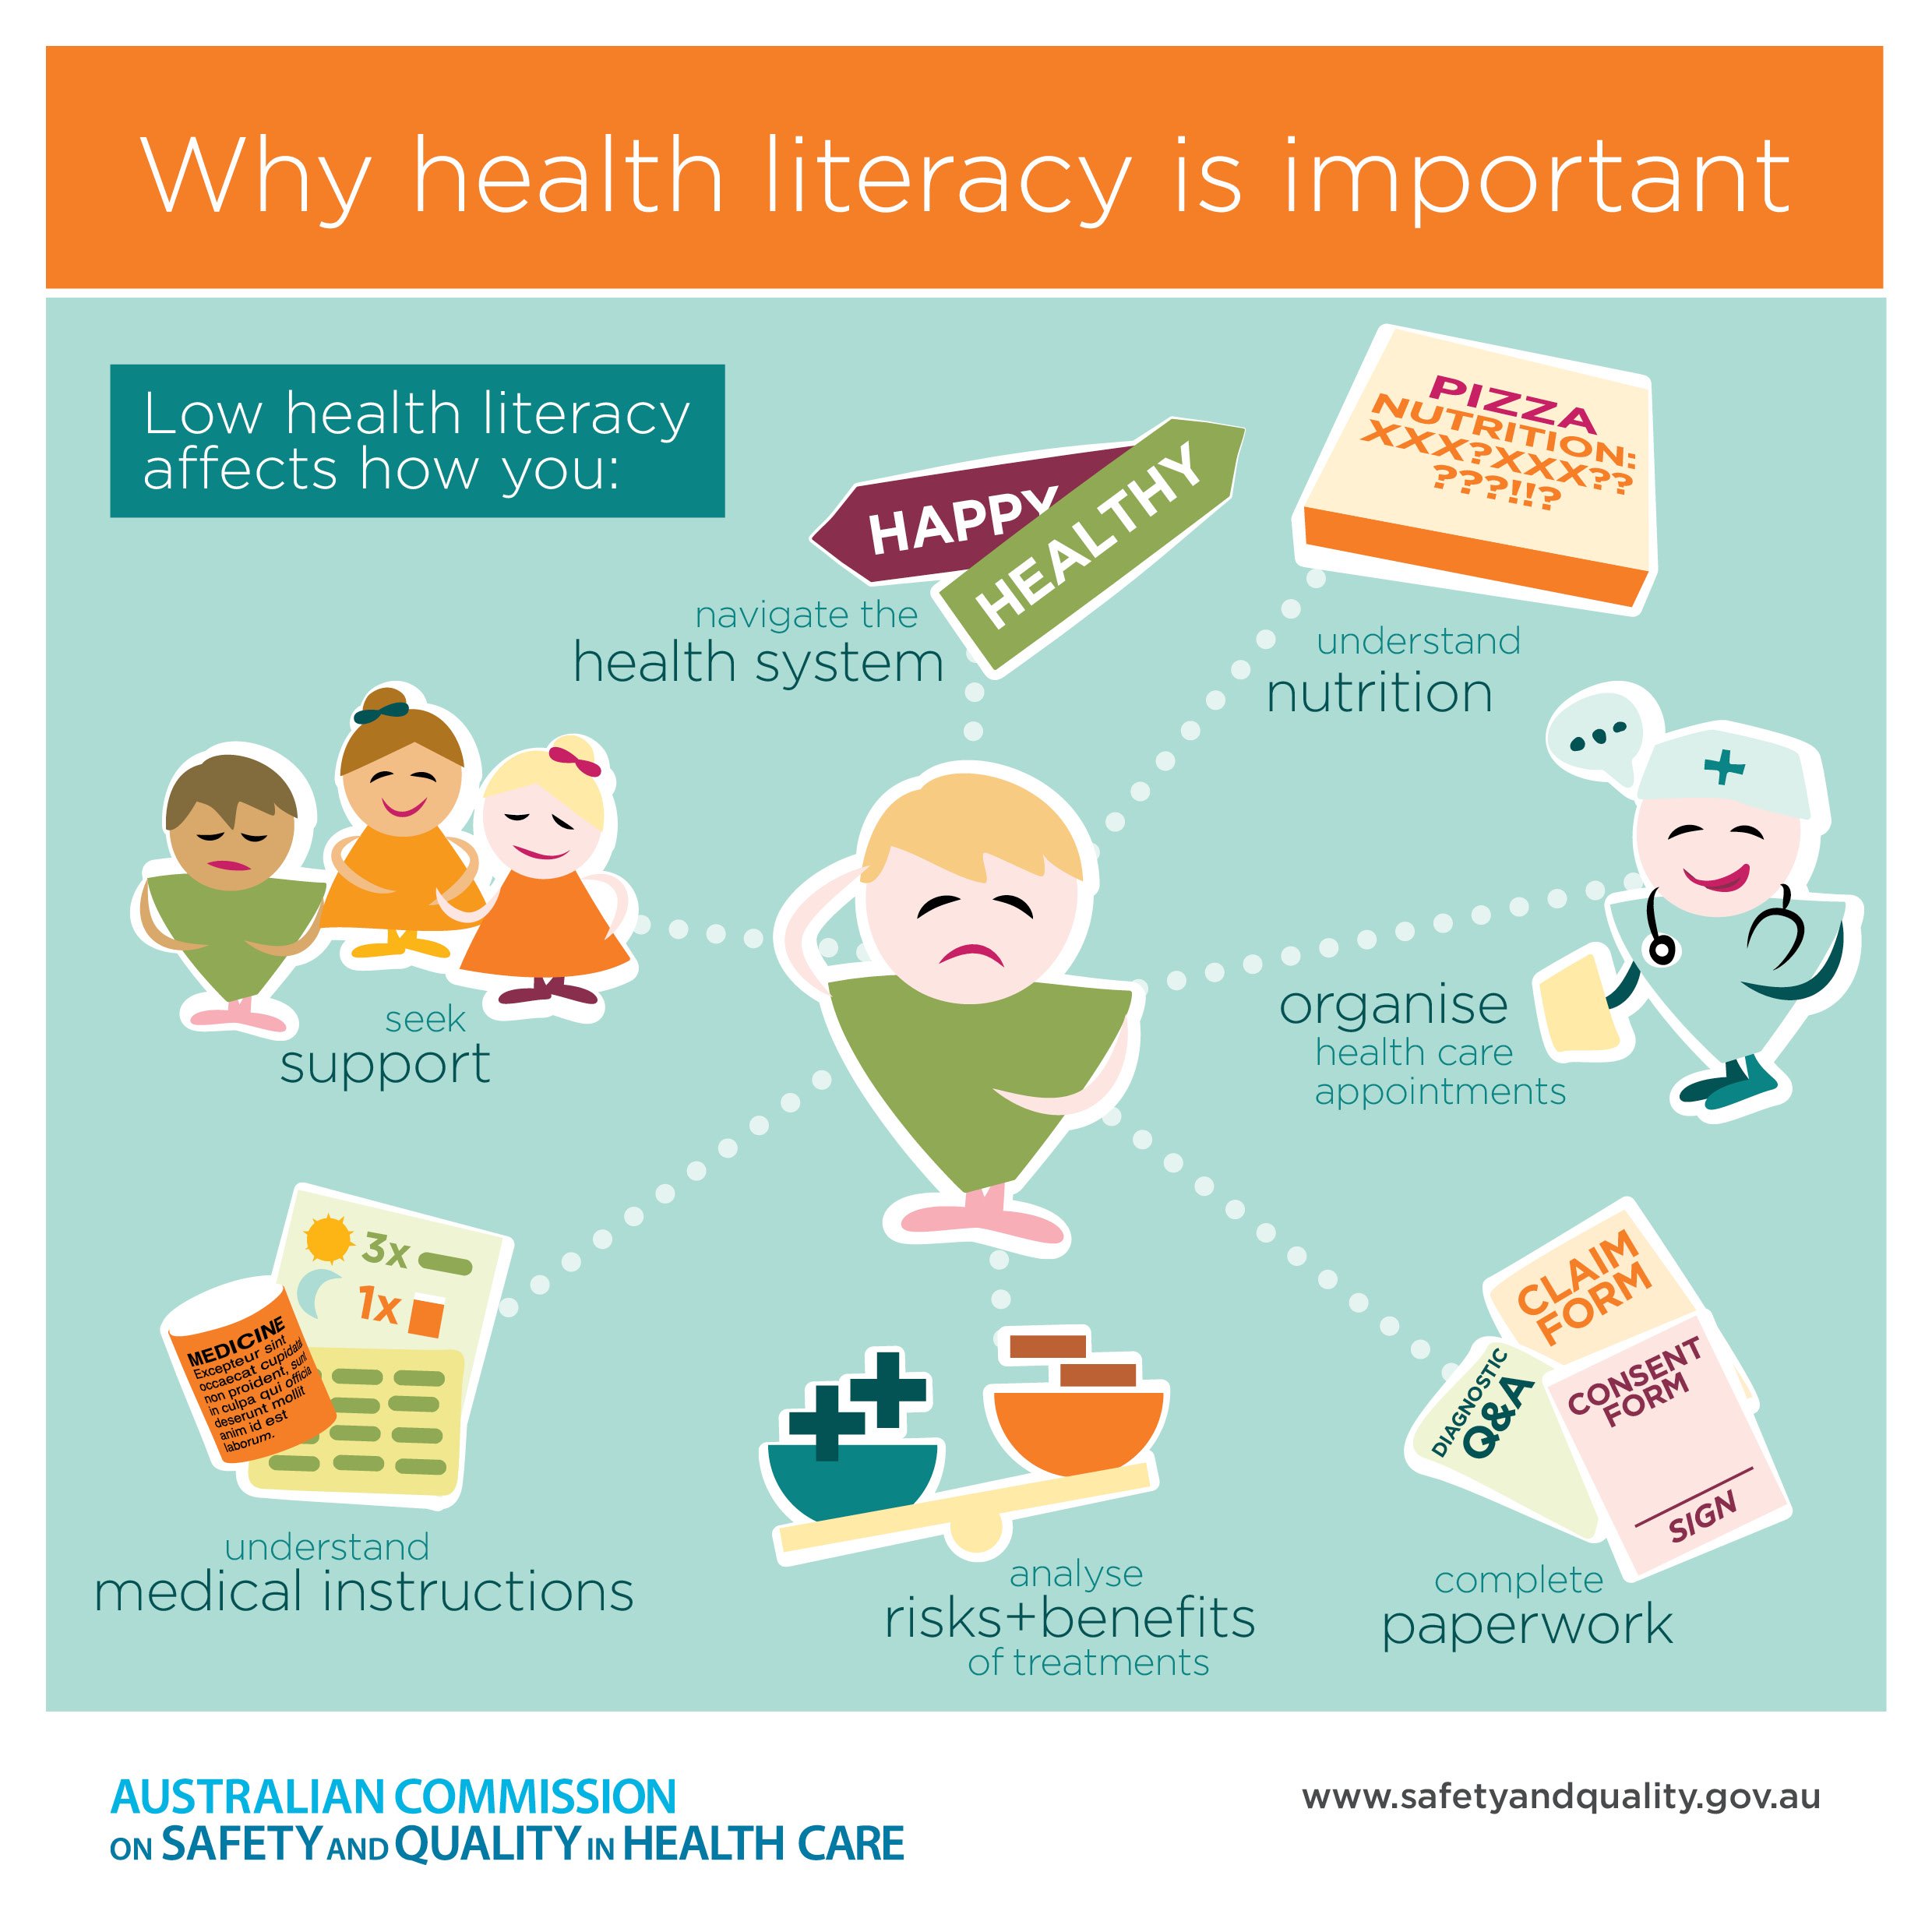 How low health literacy affects you. Text description provided.